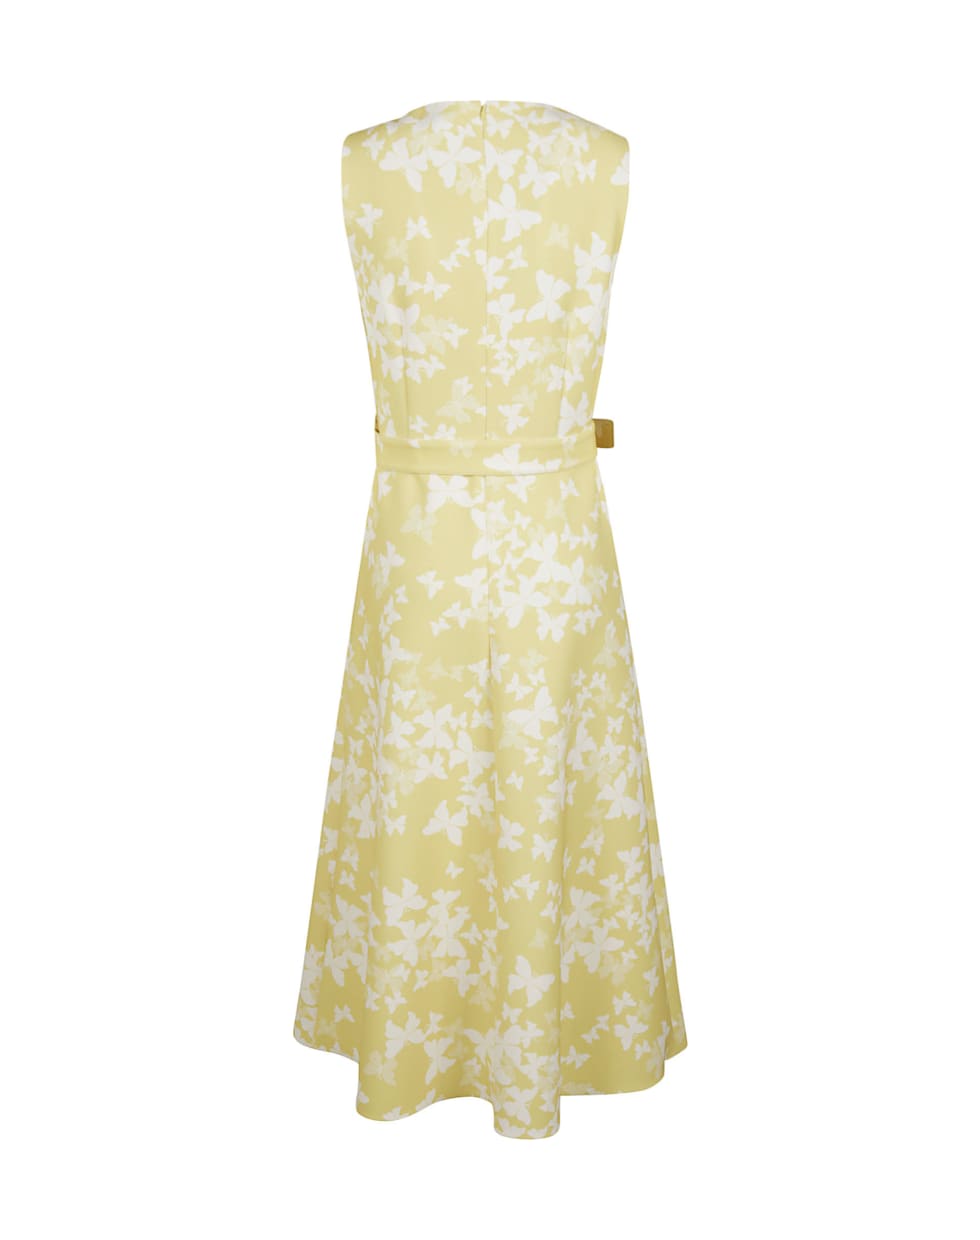 RED Valentino Butterfly Print Sleeveless Belted Dress - Yellow